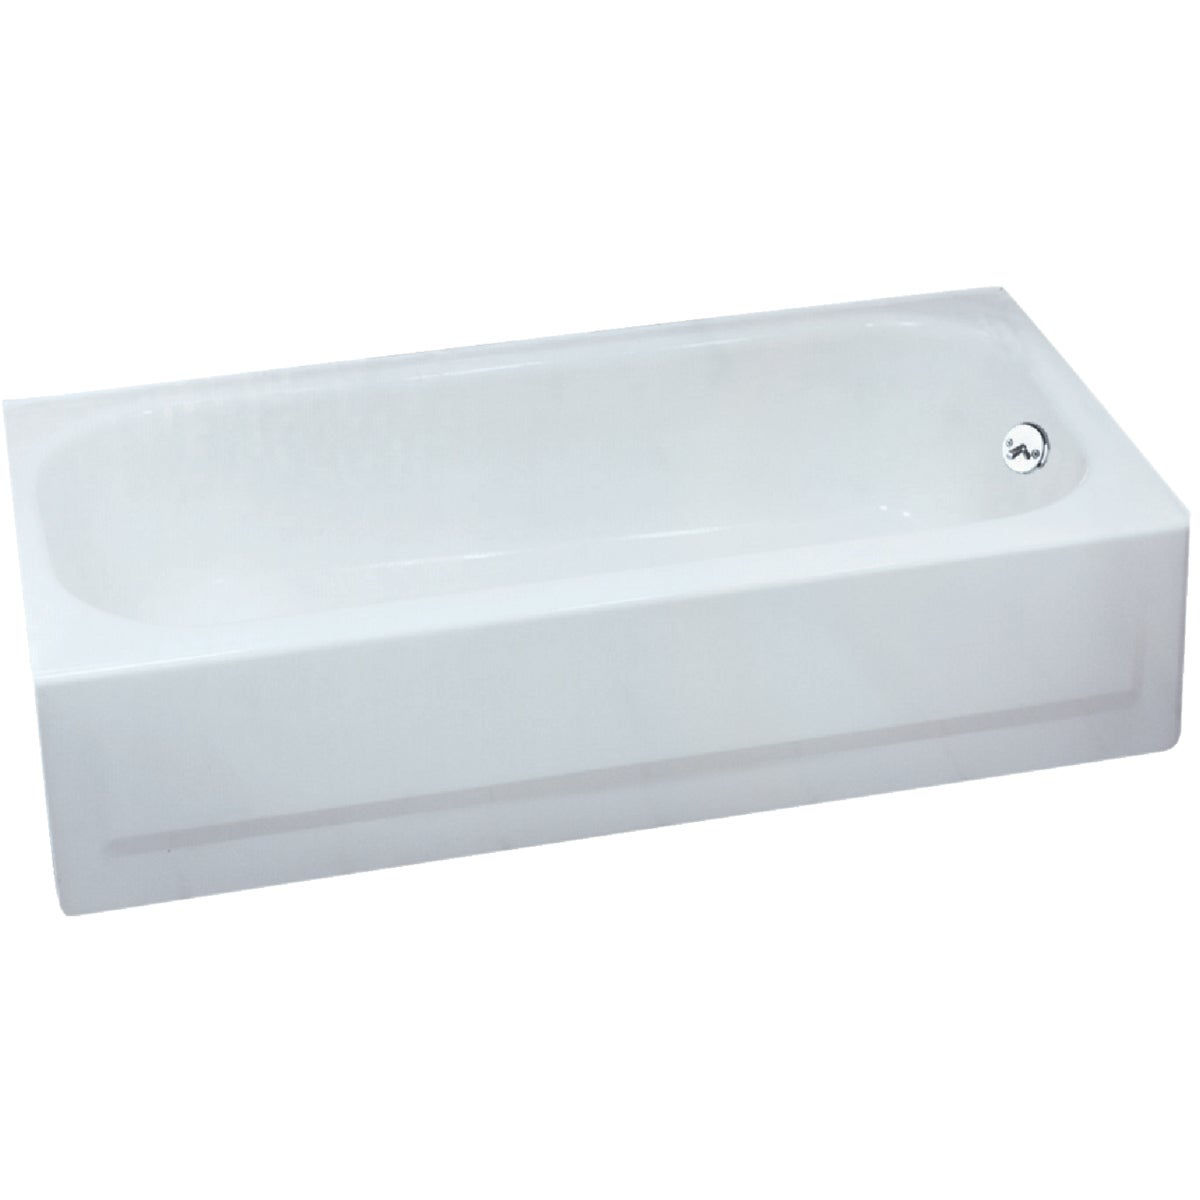 Shoes Online at Better Houseware Bath & Laundry Bath Tub Drying